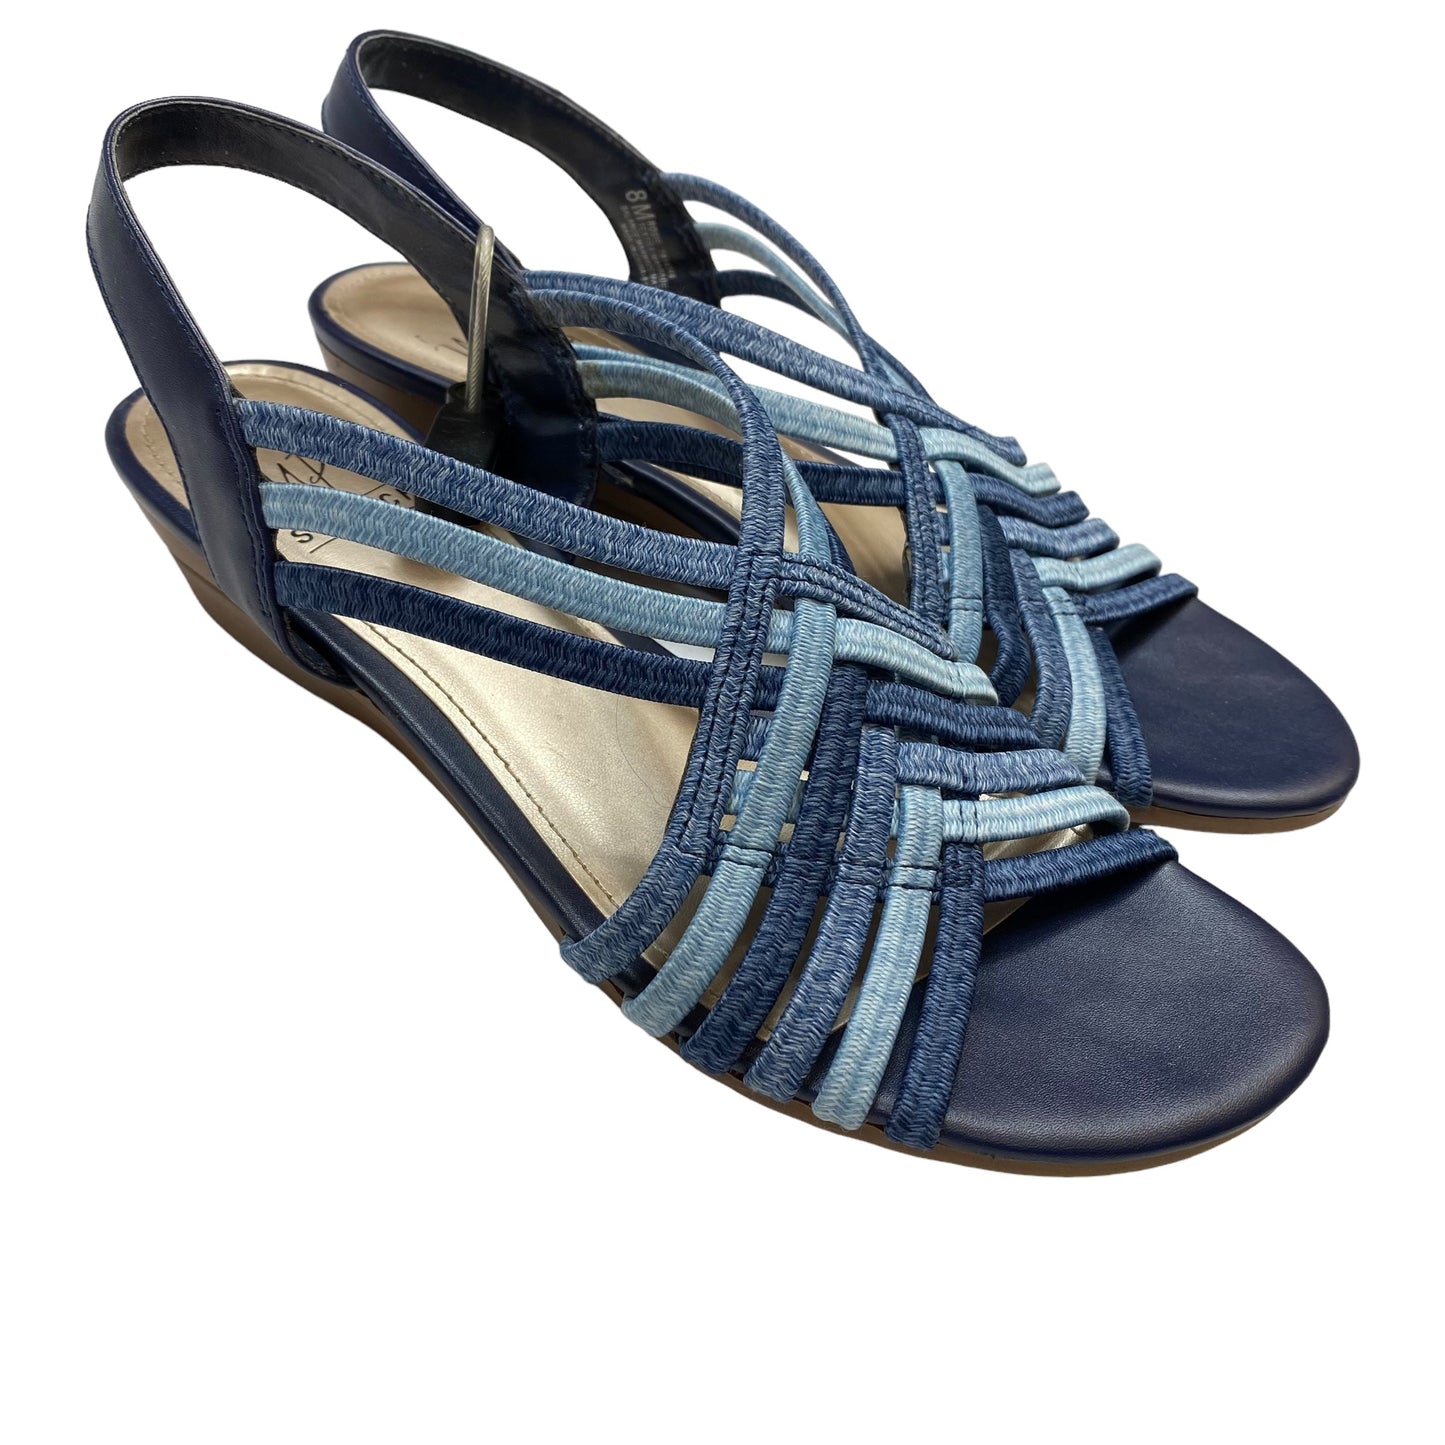 Blue Sandals Heels Wedge Impo, Size 8